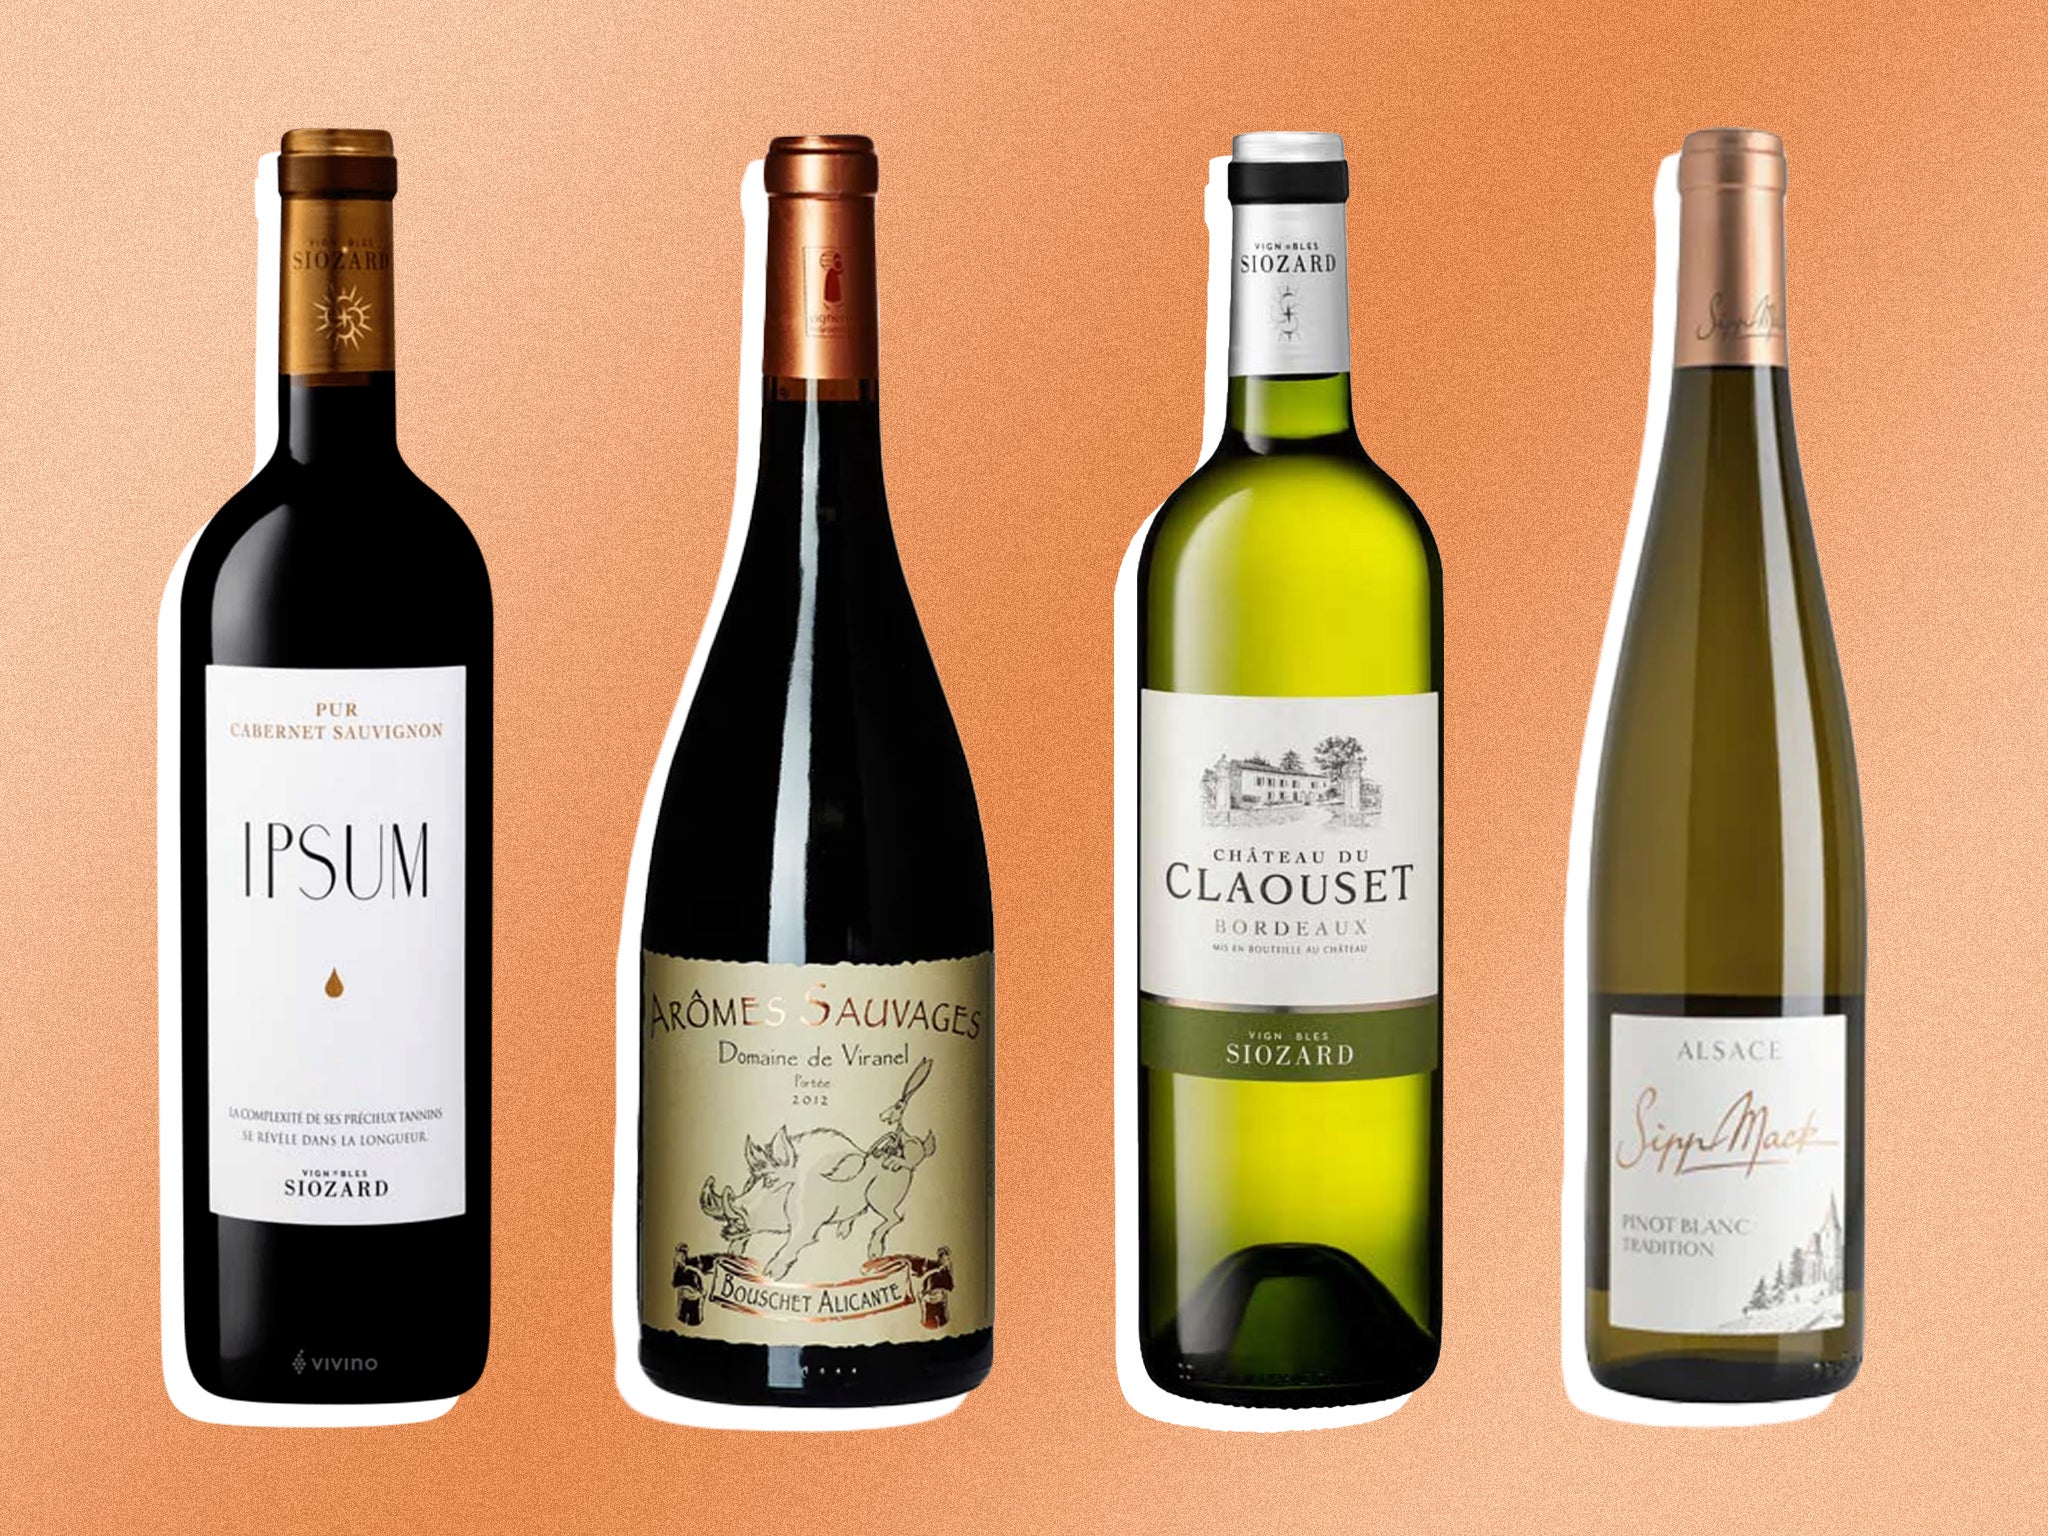 This list showcases the best regions in six bottles